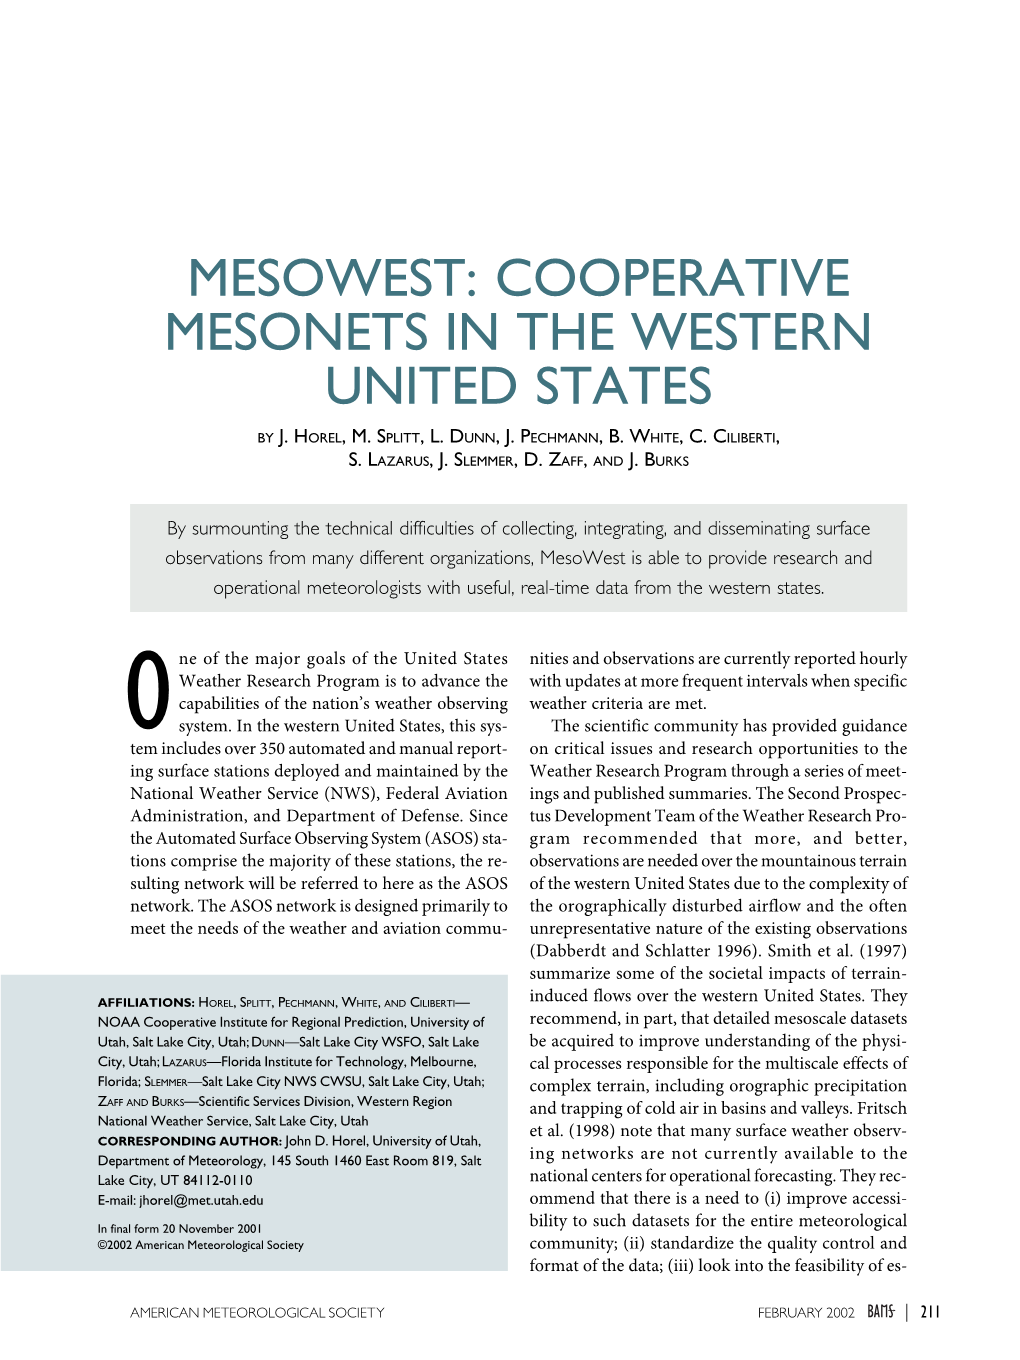 Mesowest: Cooperative Mesonets in the Western United States